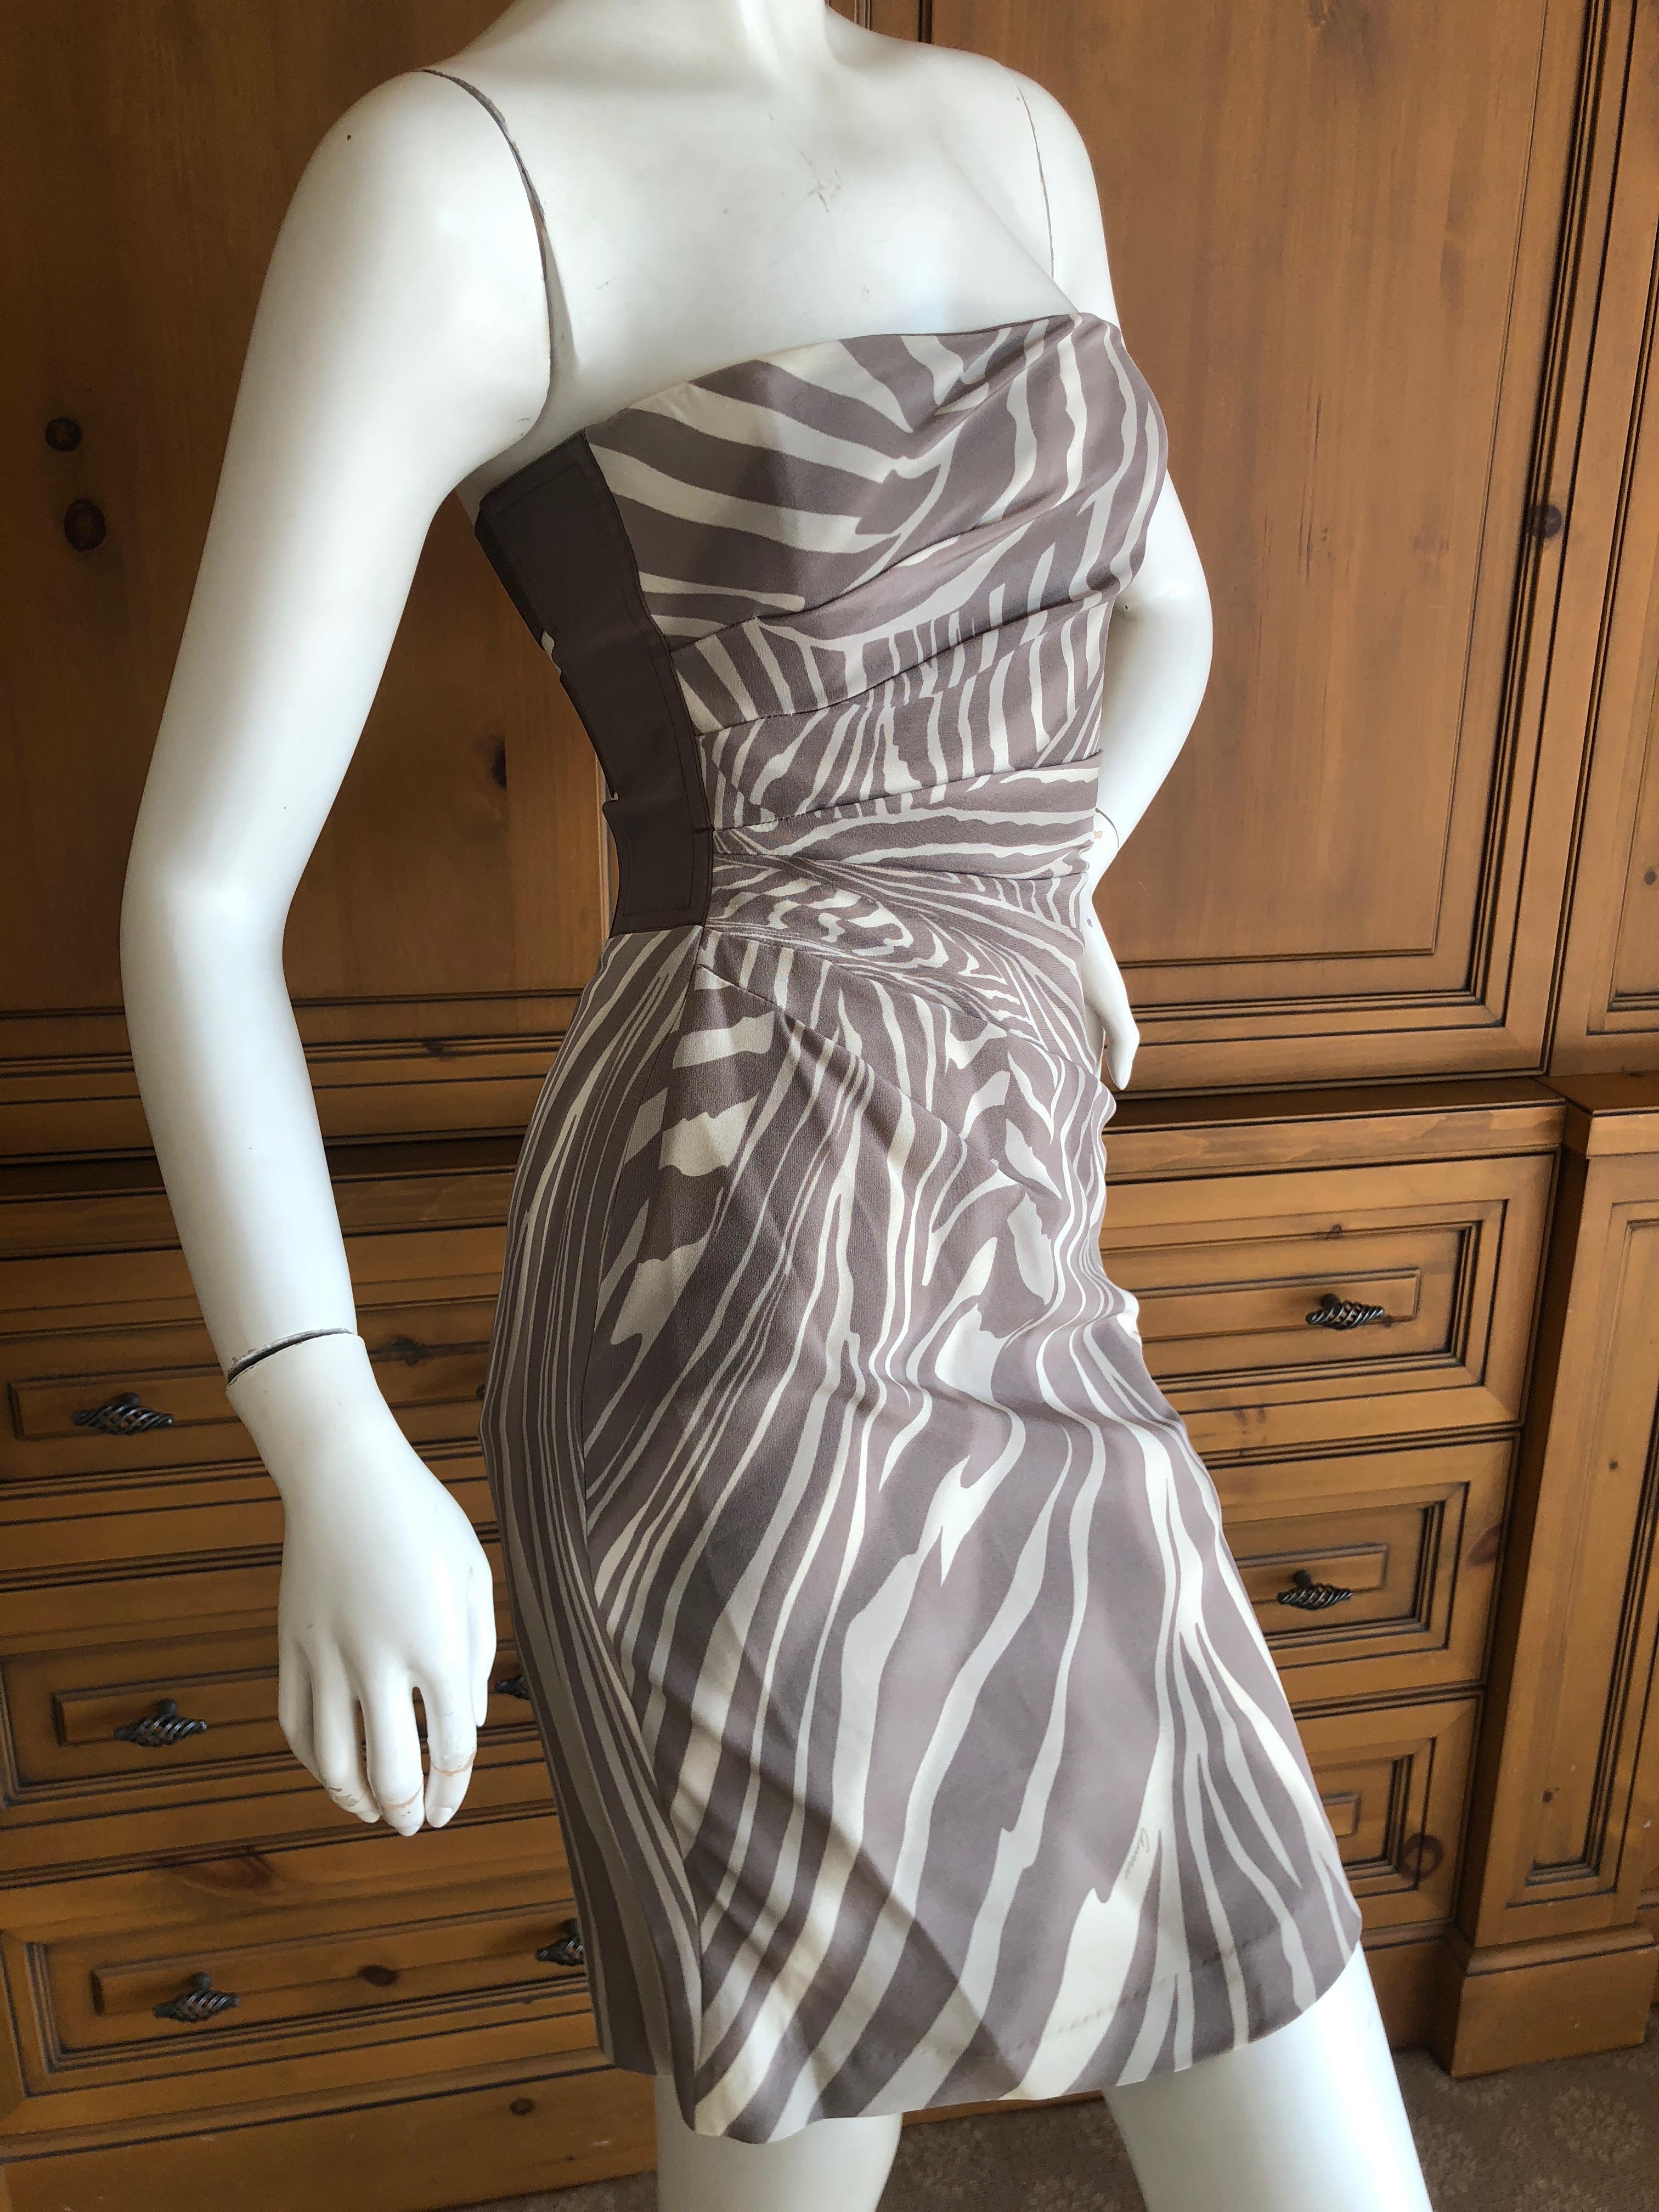 Gucci by Tom Ford Silk Strapless Zebra Pattern Mini Dress Size 38 In Excellent Condition For Sale In Cloverdale, CA